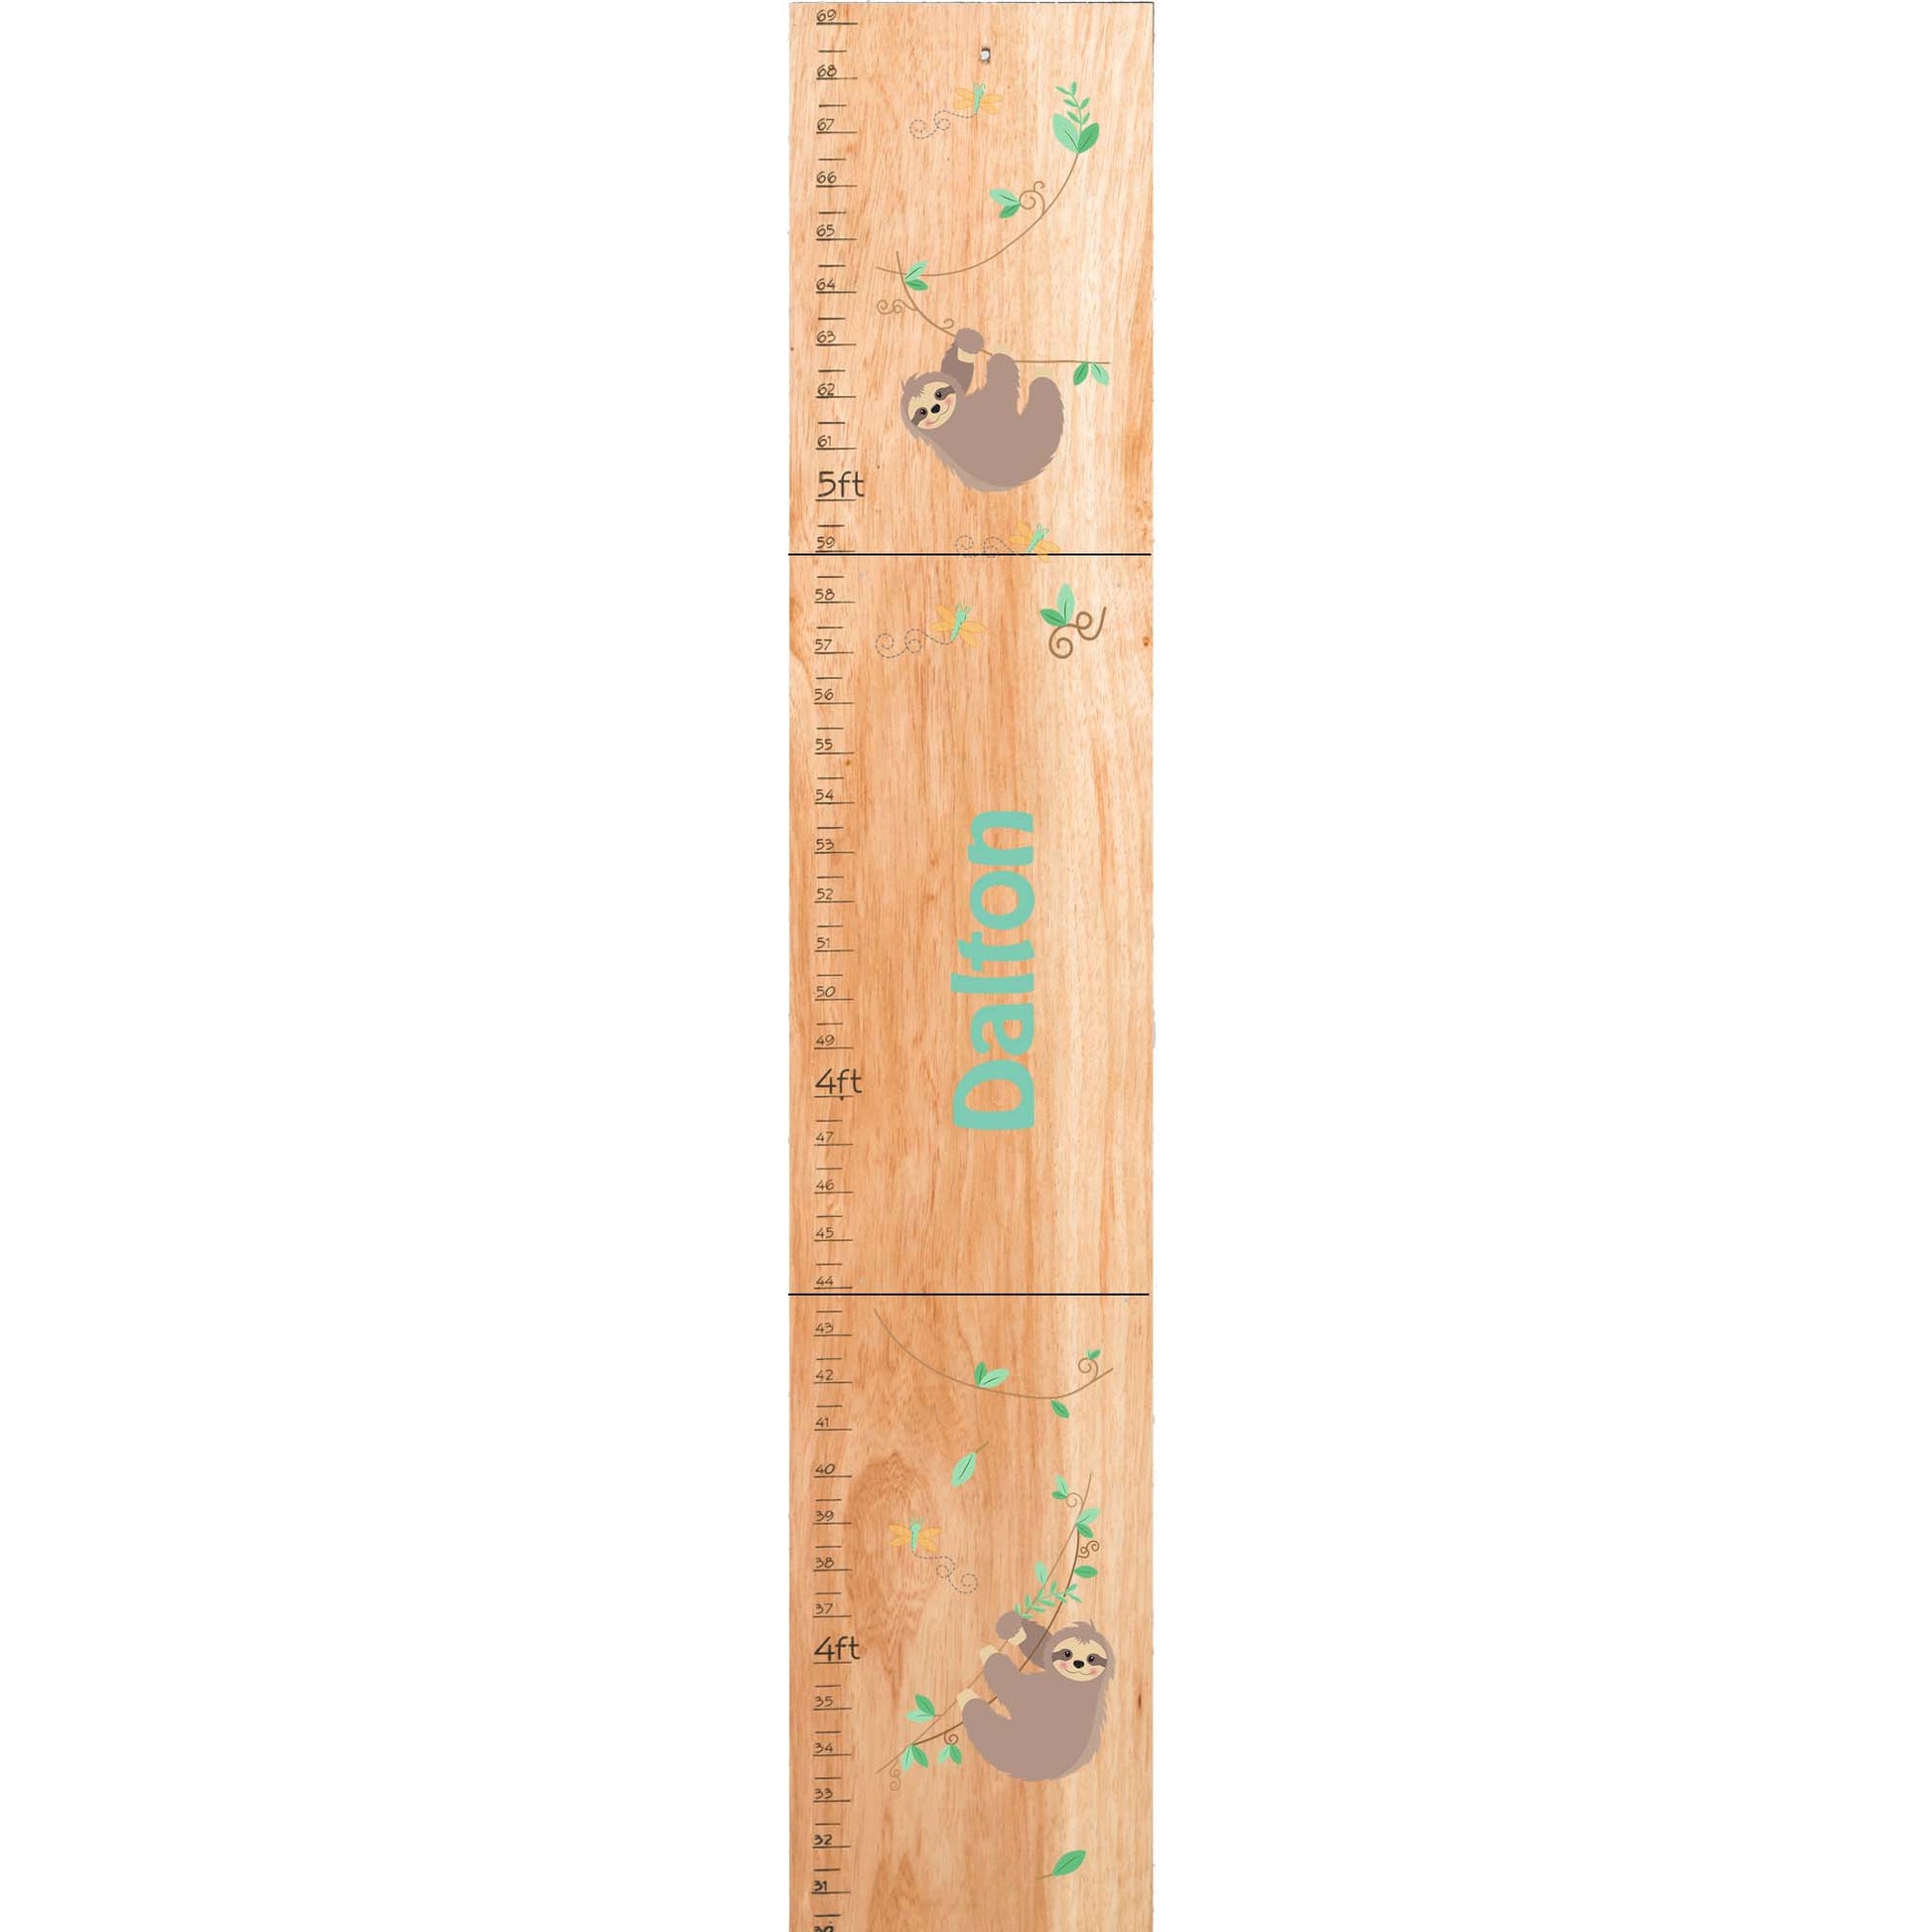 Personalized Natural Wooden Growth Chart with Slothie Boy design